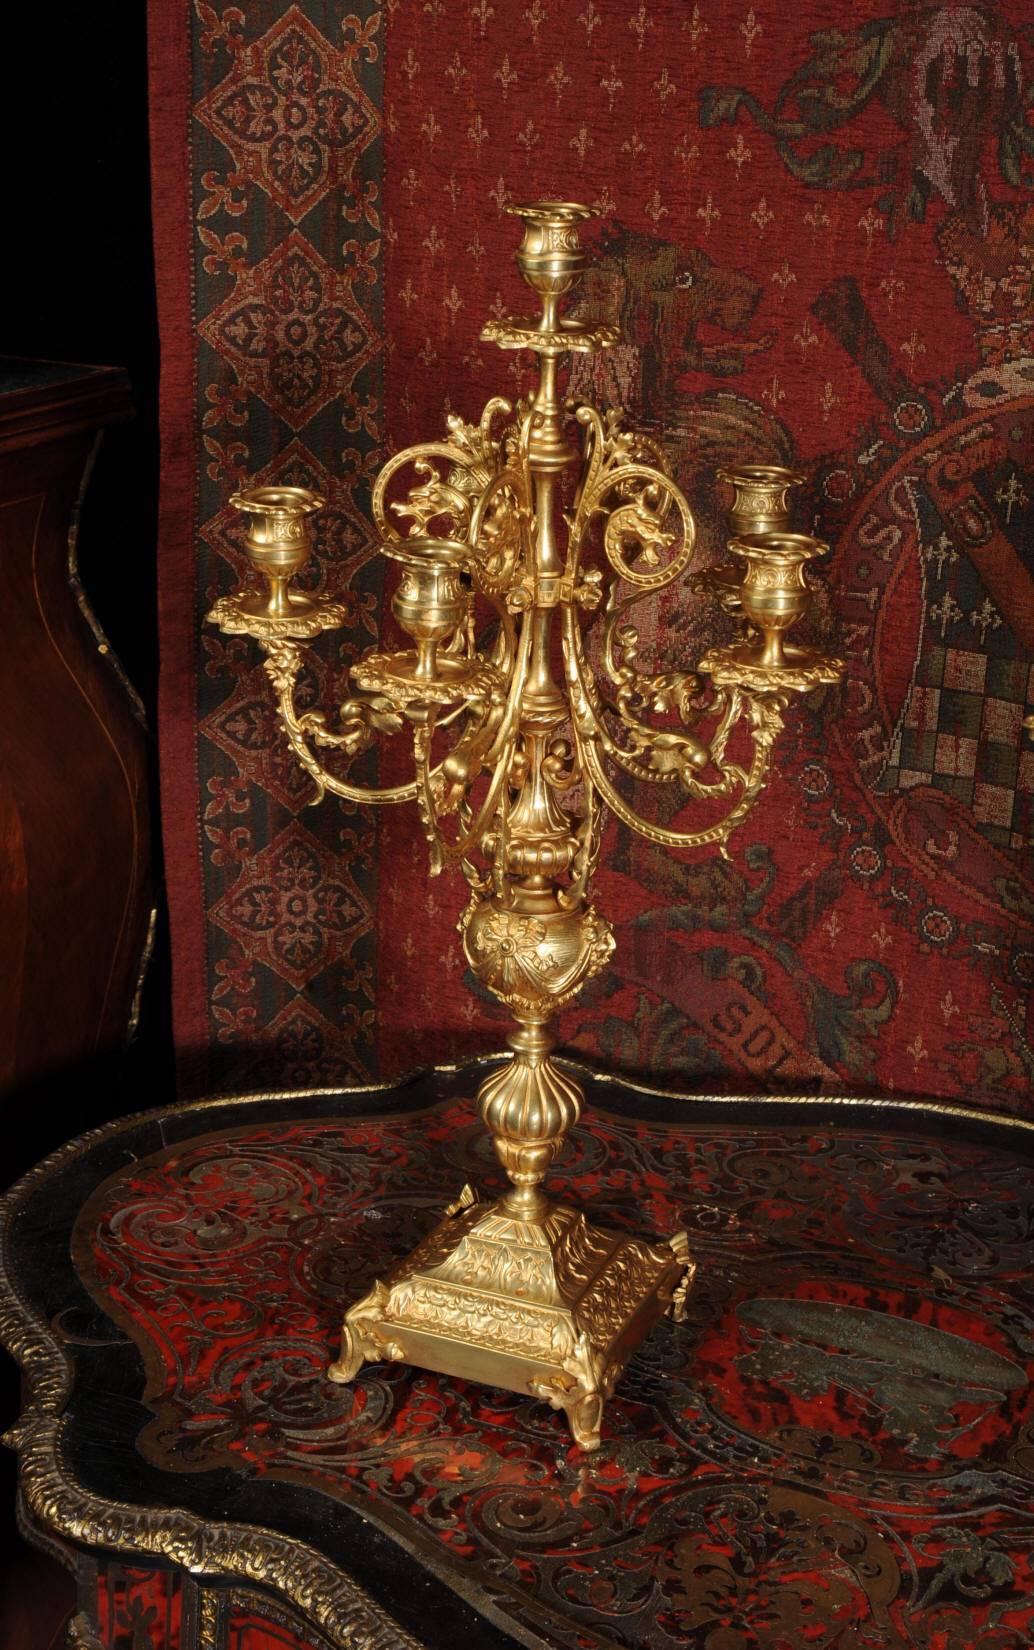 A superb pair of gilt bronze candelabra. Dating from circa 1880 and French, they are Baroque in style with sweeping arms with mythical masks supporting the five lights with a further light to the center.